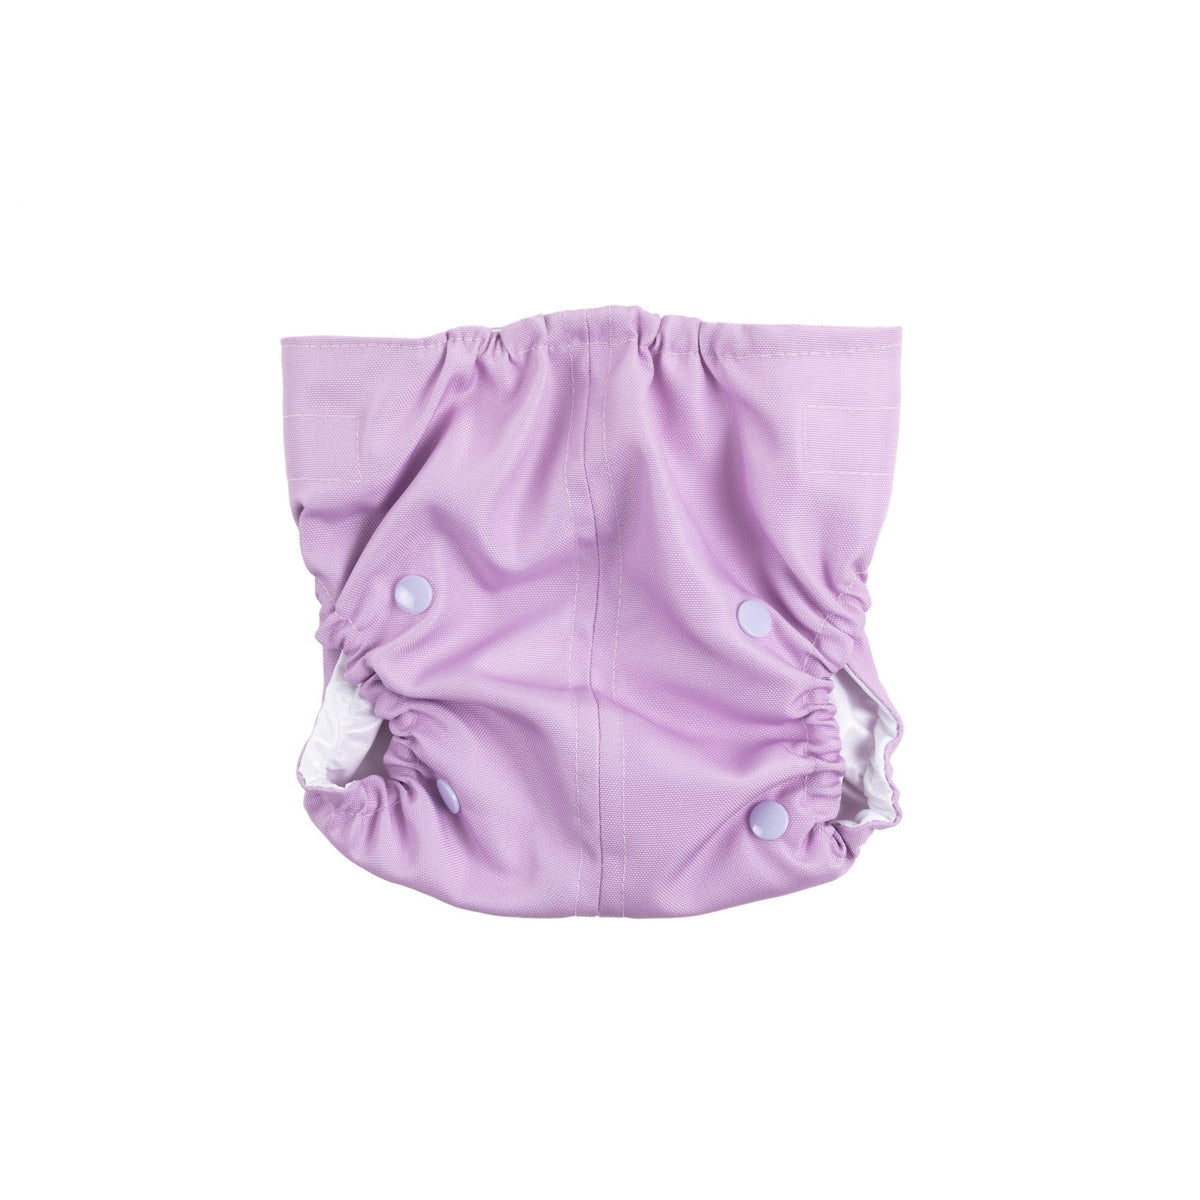 Dundies Lilac All In One Nappy (AIO)-Dundies Australia - Vet Recommended Pet Nappies